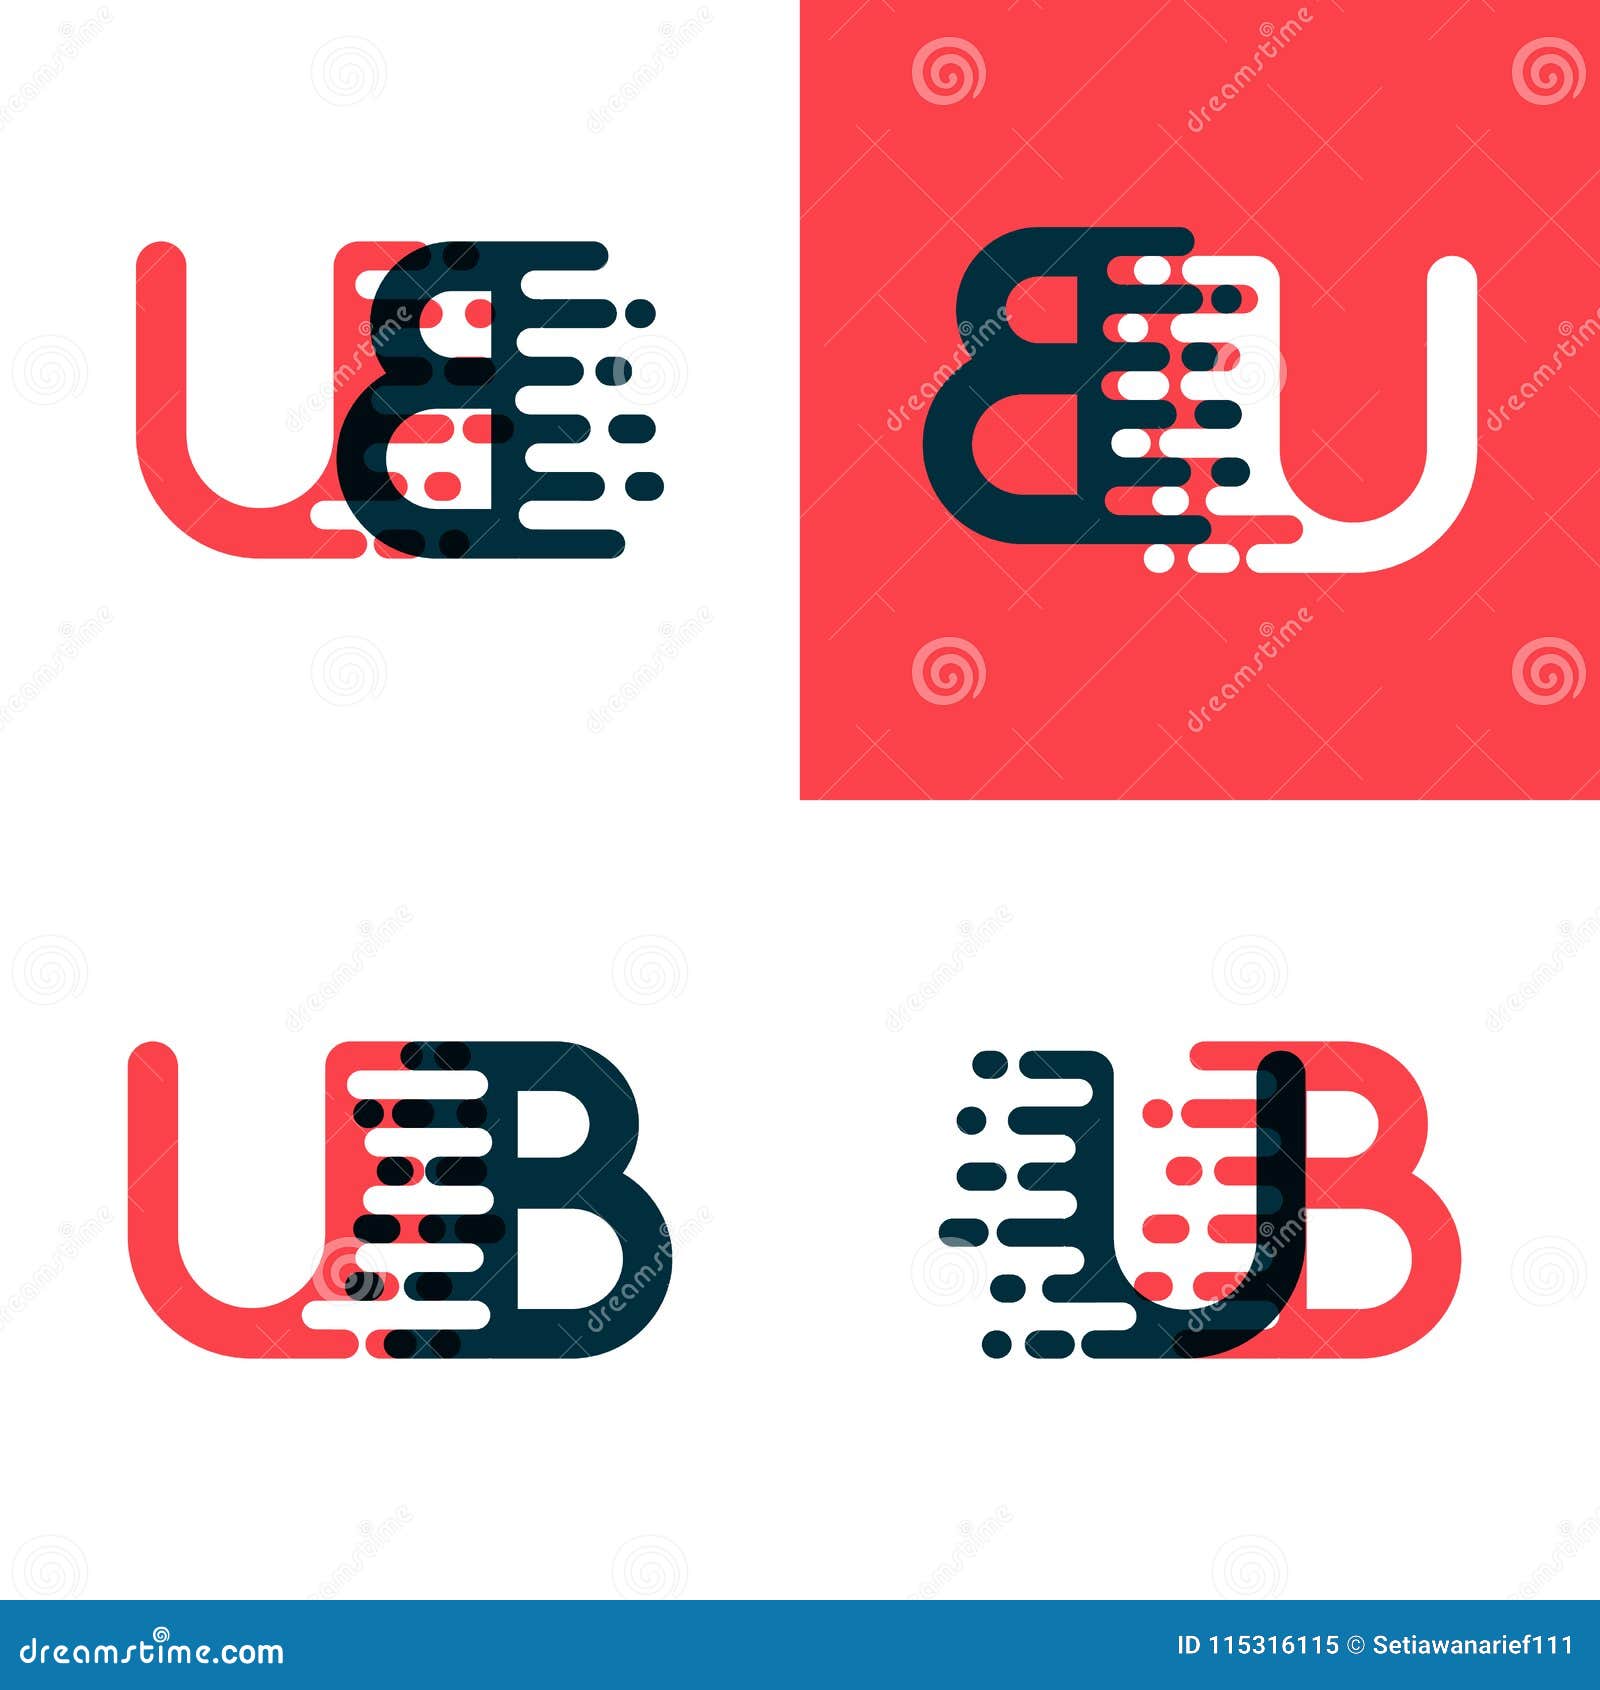 UB Letters Logo With Accent Speed Dark Red And Dark Blue ...